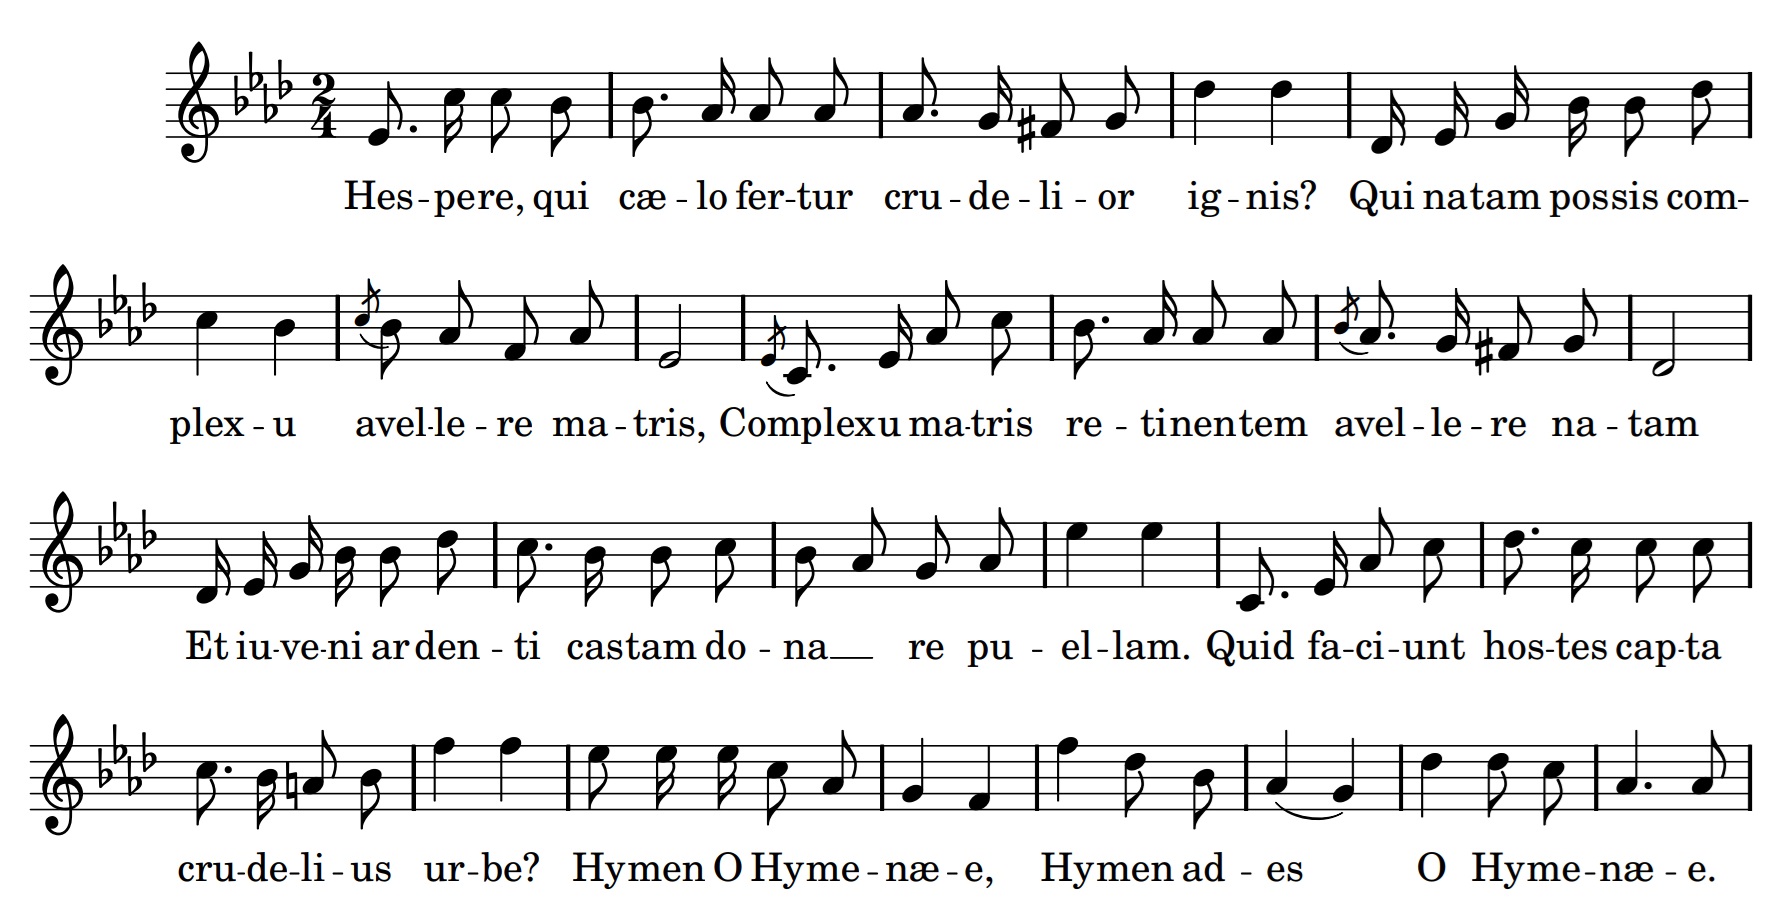 The song text with accompanying sheet music.